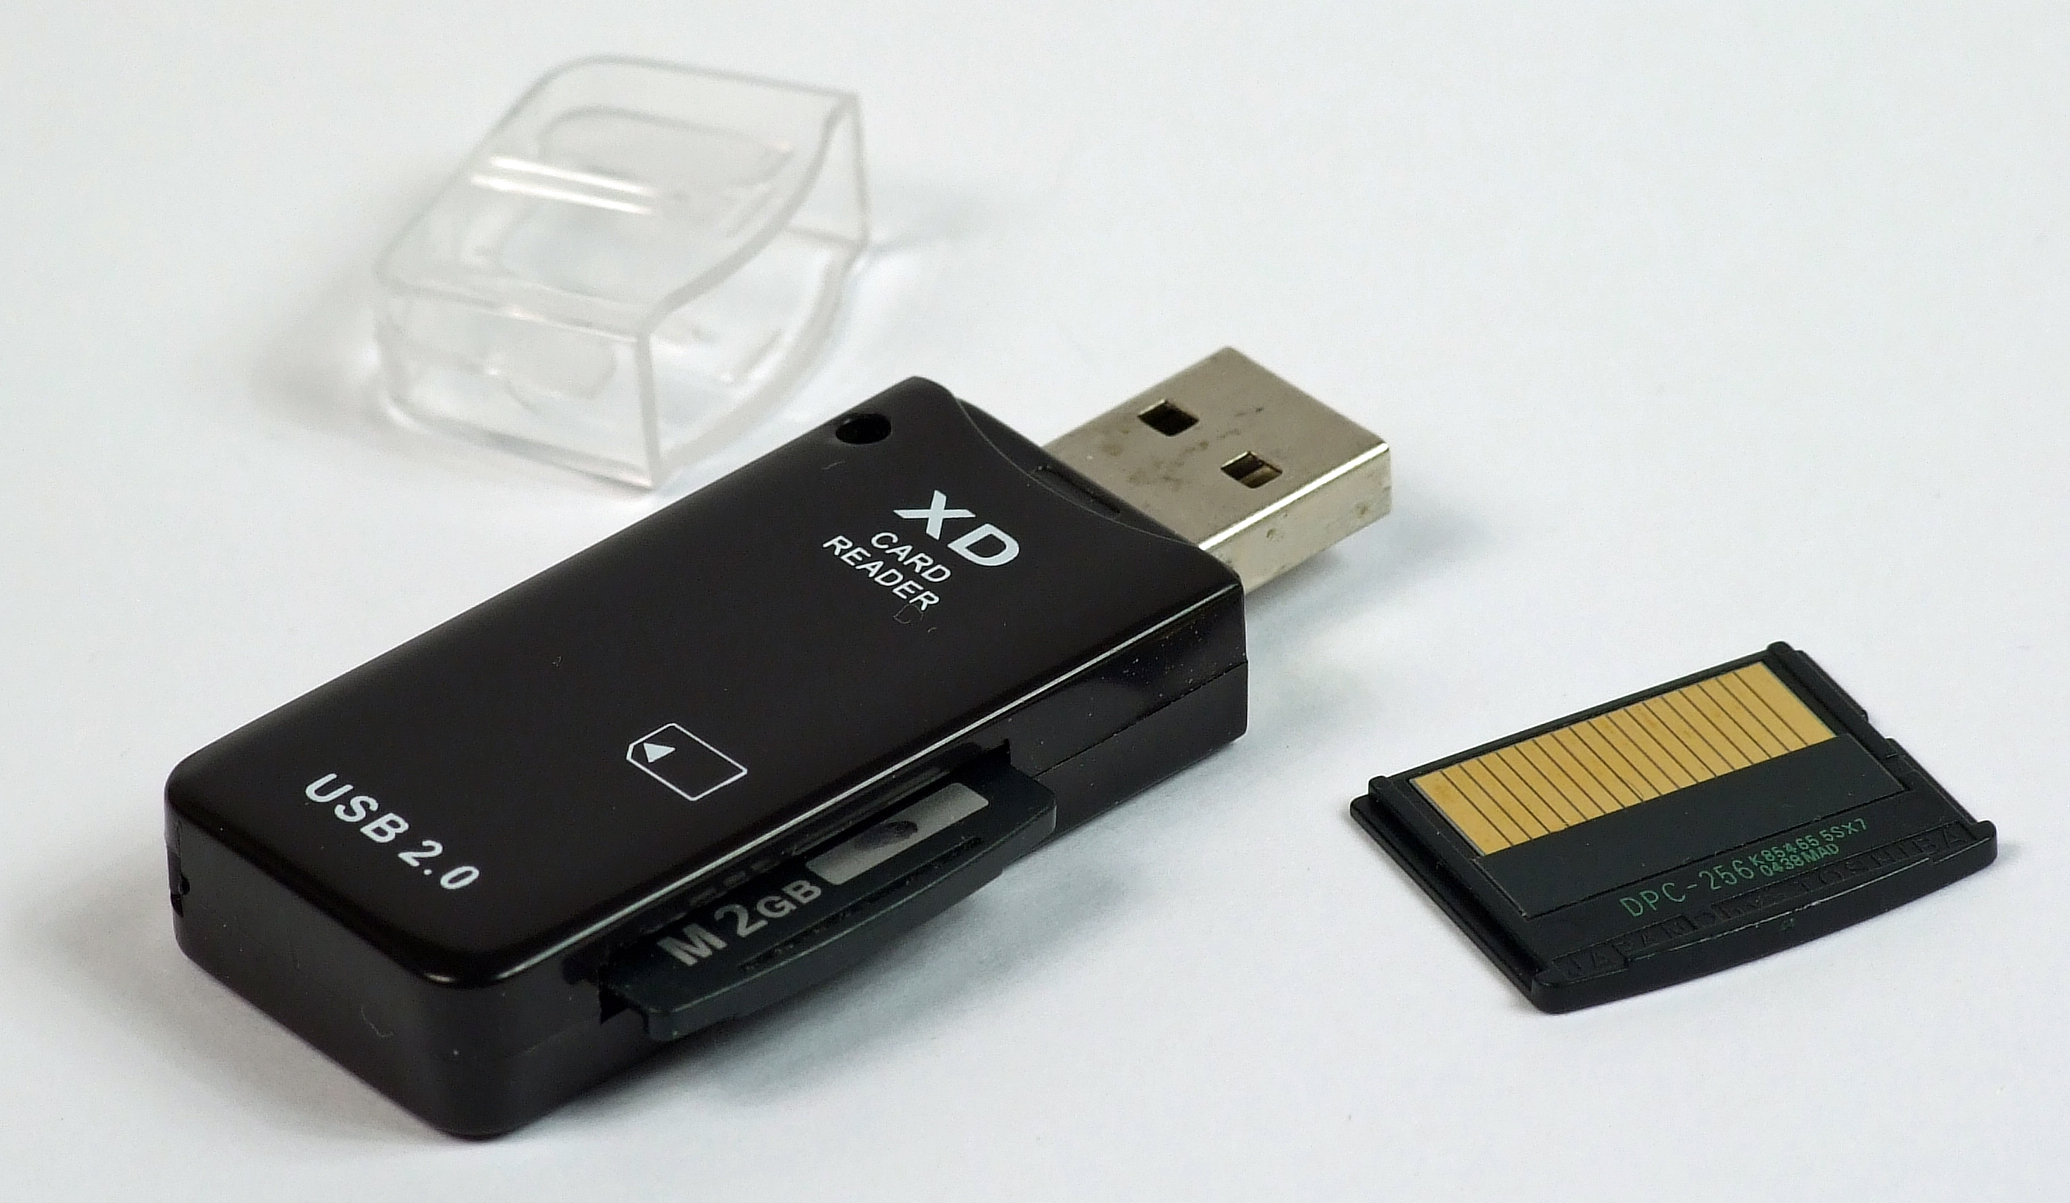 XD Card to USB adapter with cards